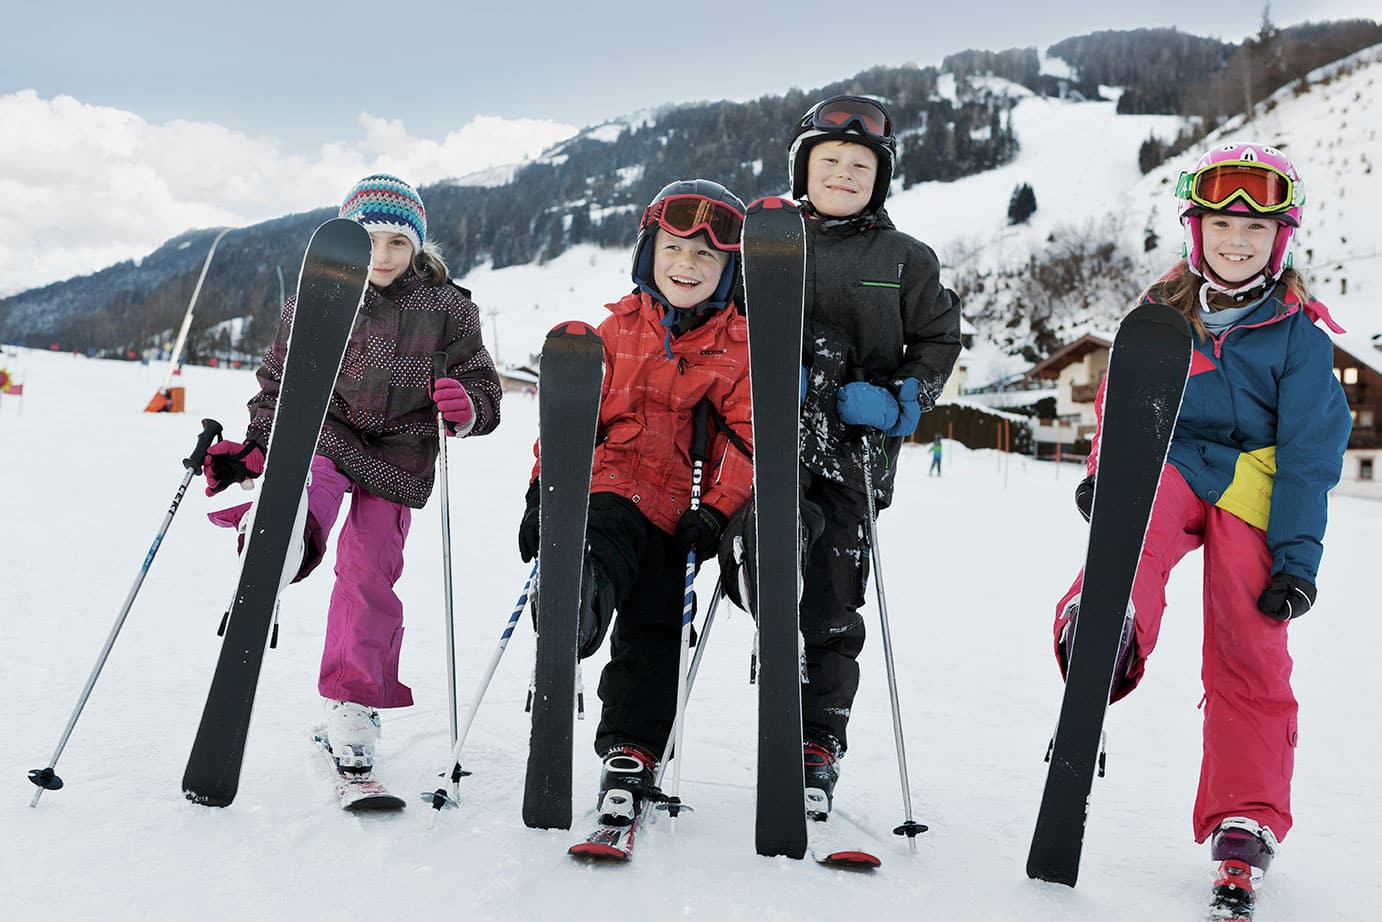 Ski holidays with the whole family